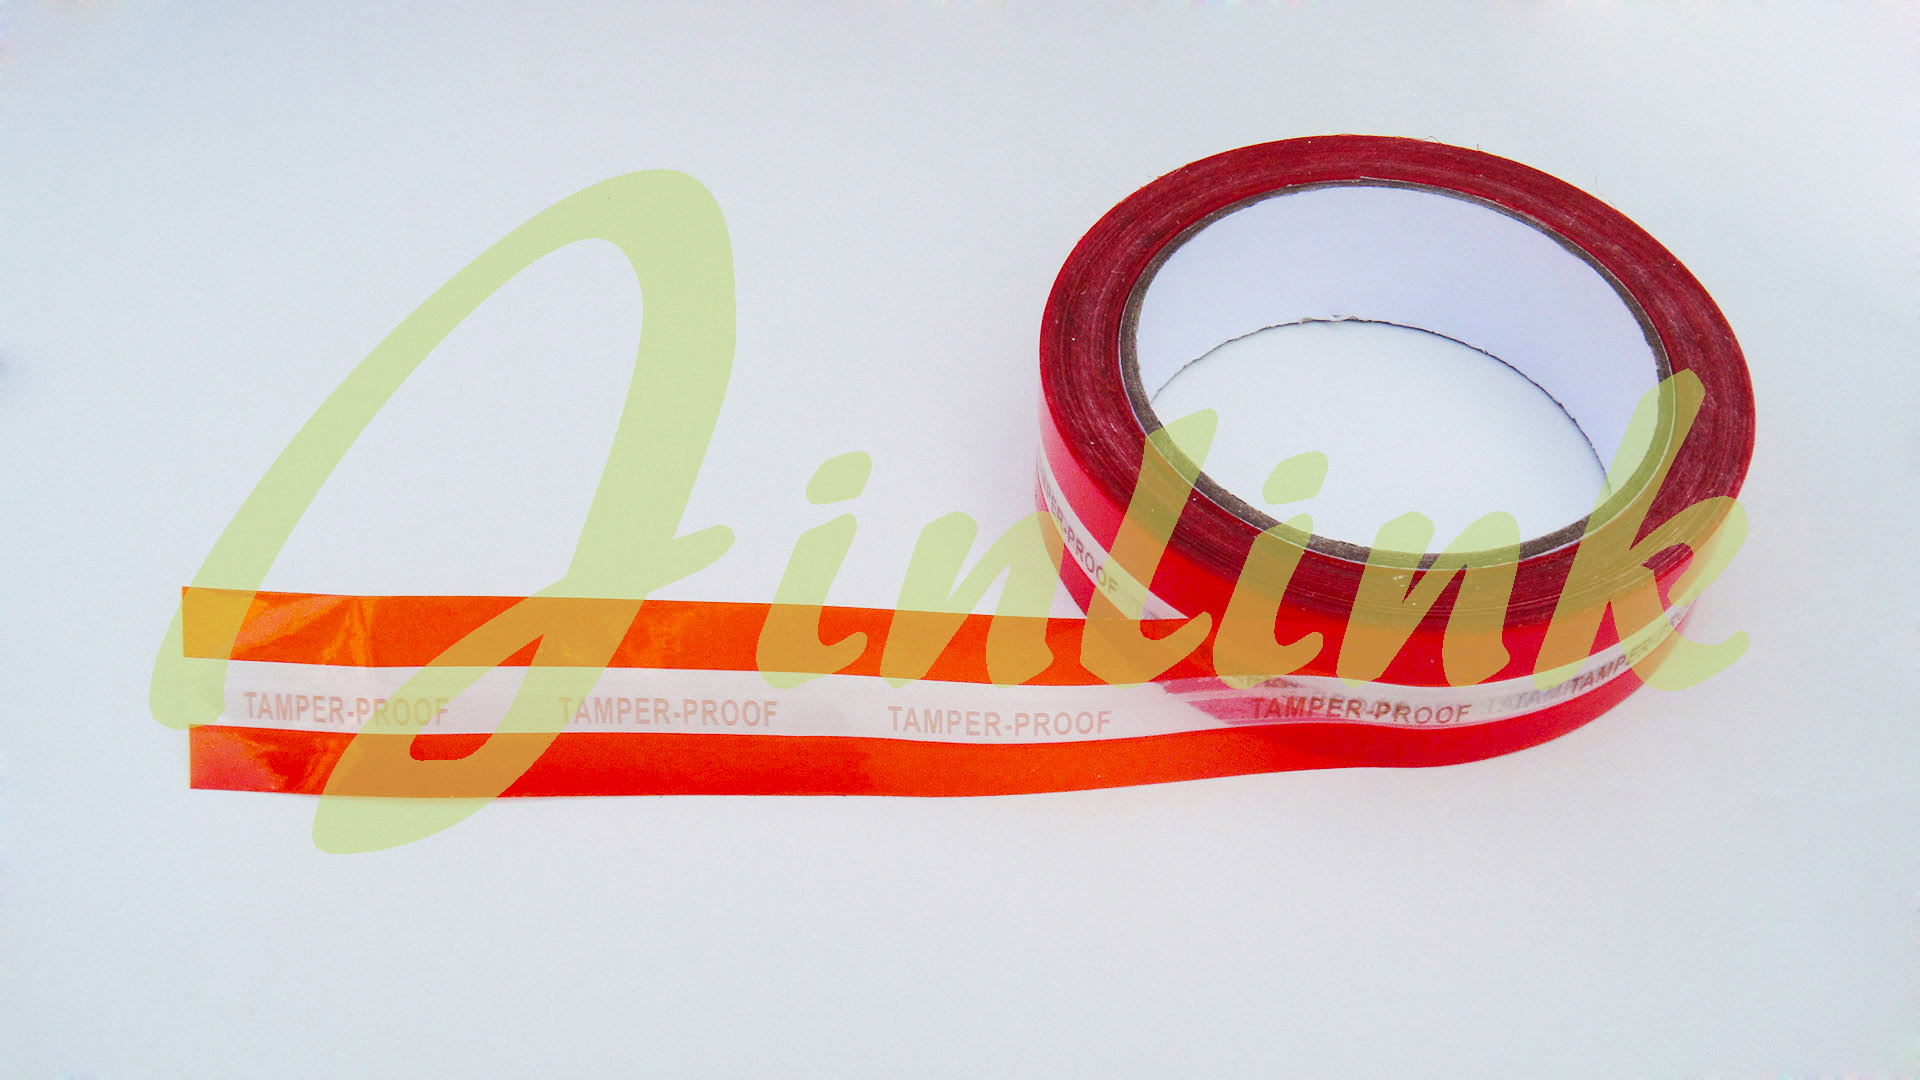 Partial transfer tamper evident VOID security tape